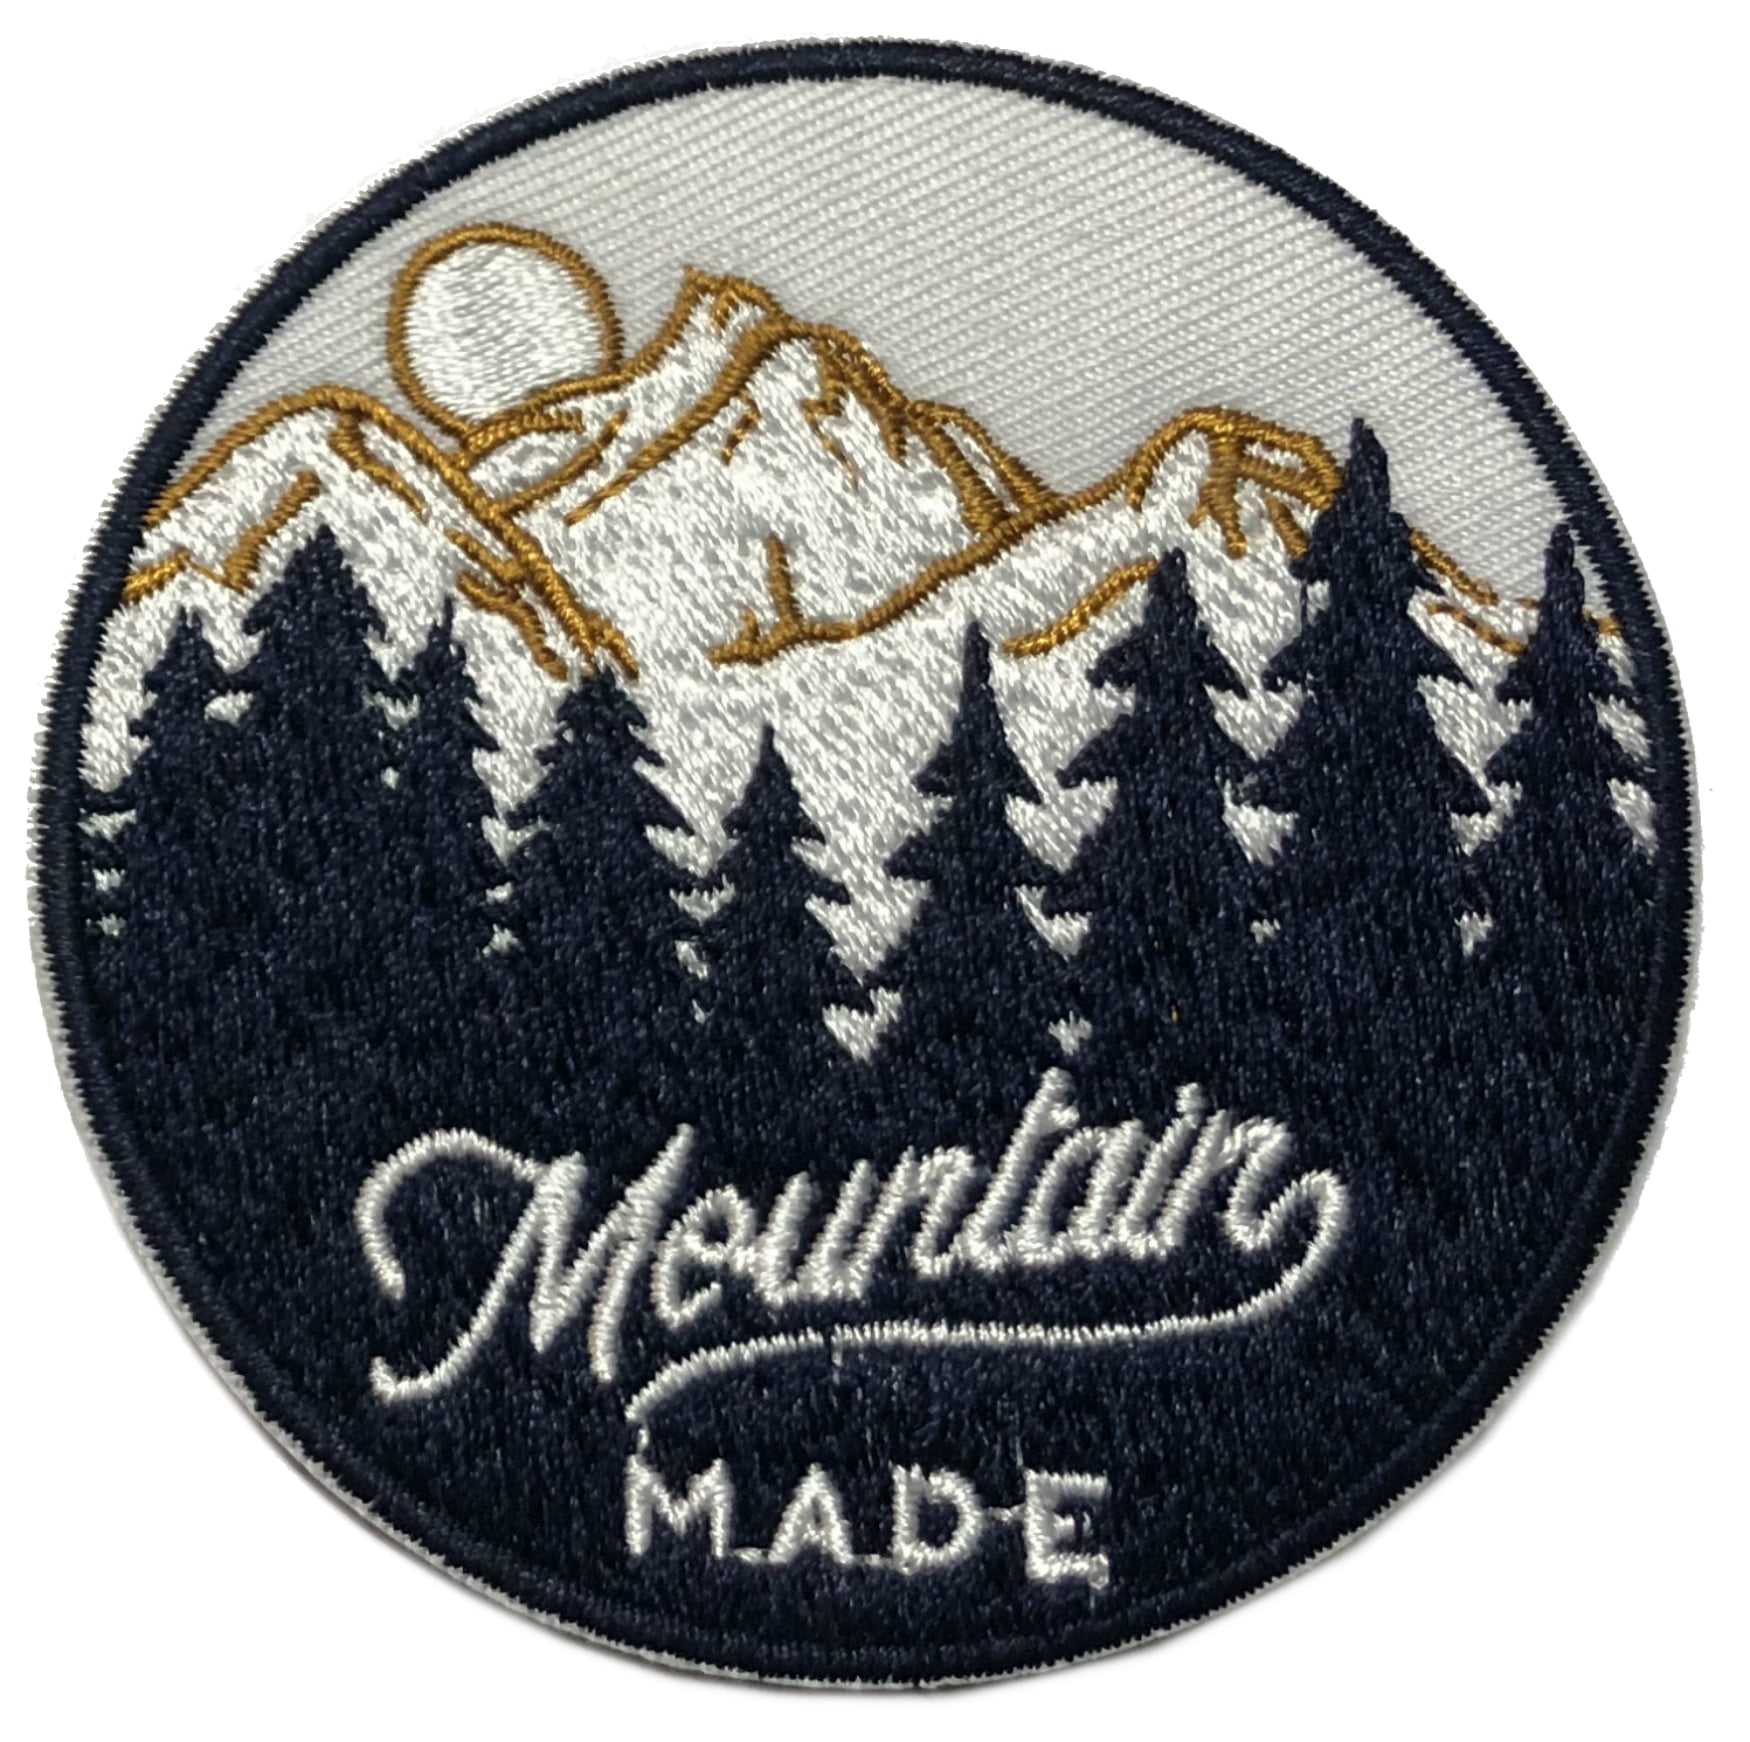 Embroidered Iron-On Patches with Mountain Water Design